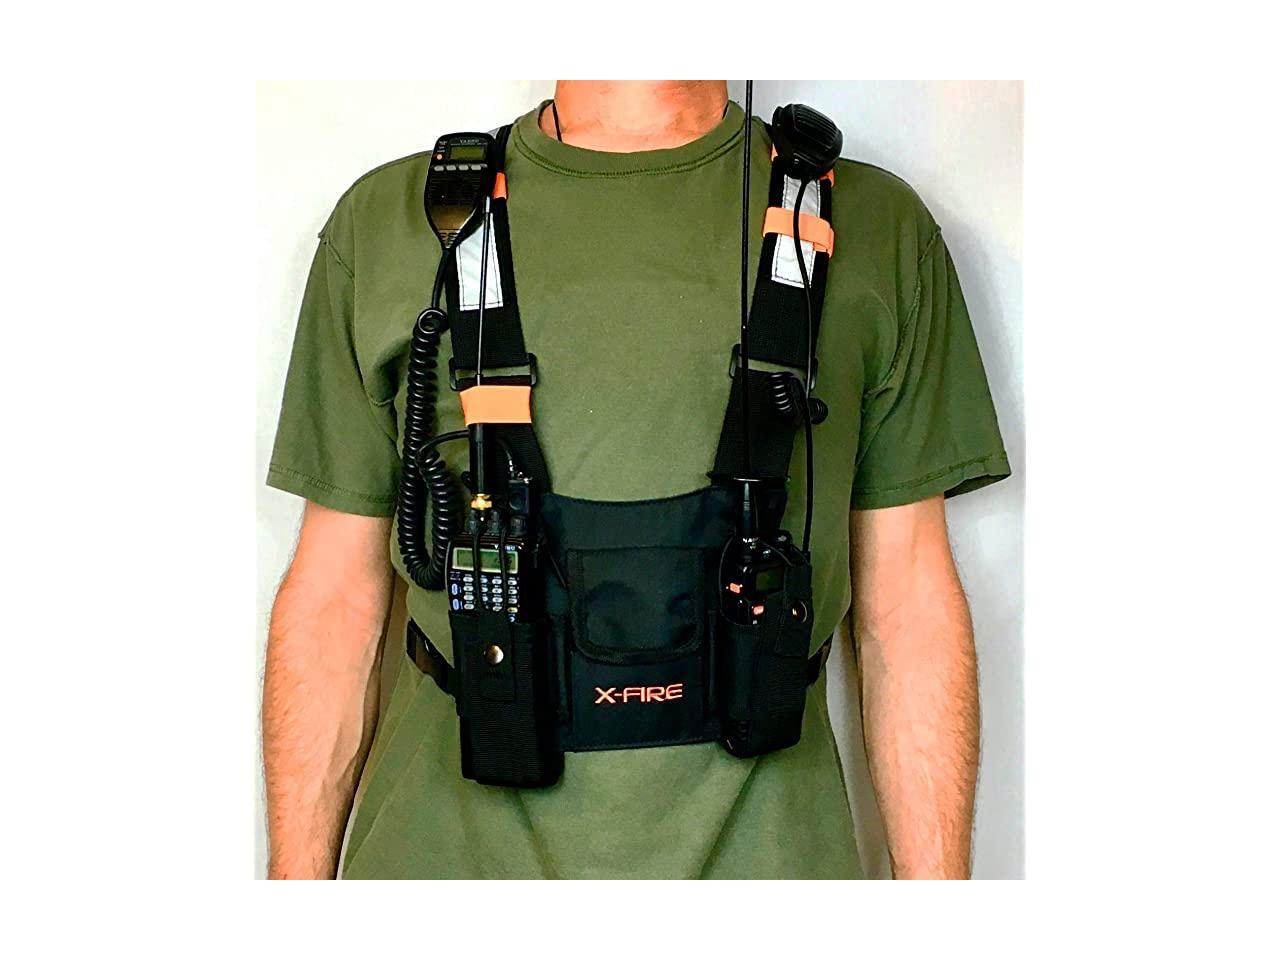 2-Pack X-FIRE ® Dual Portable Radio Chest Rig Harness Vest Chaleco Holder 